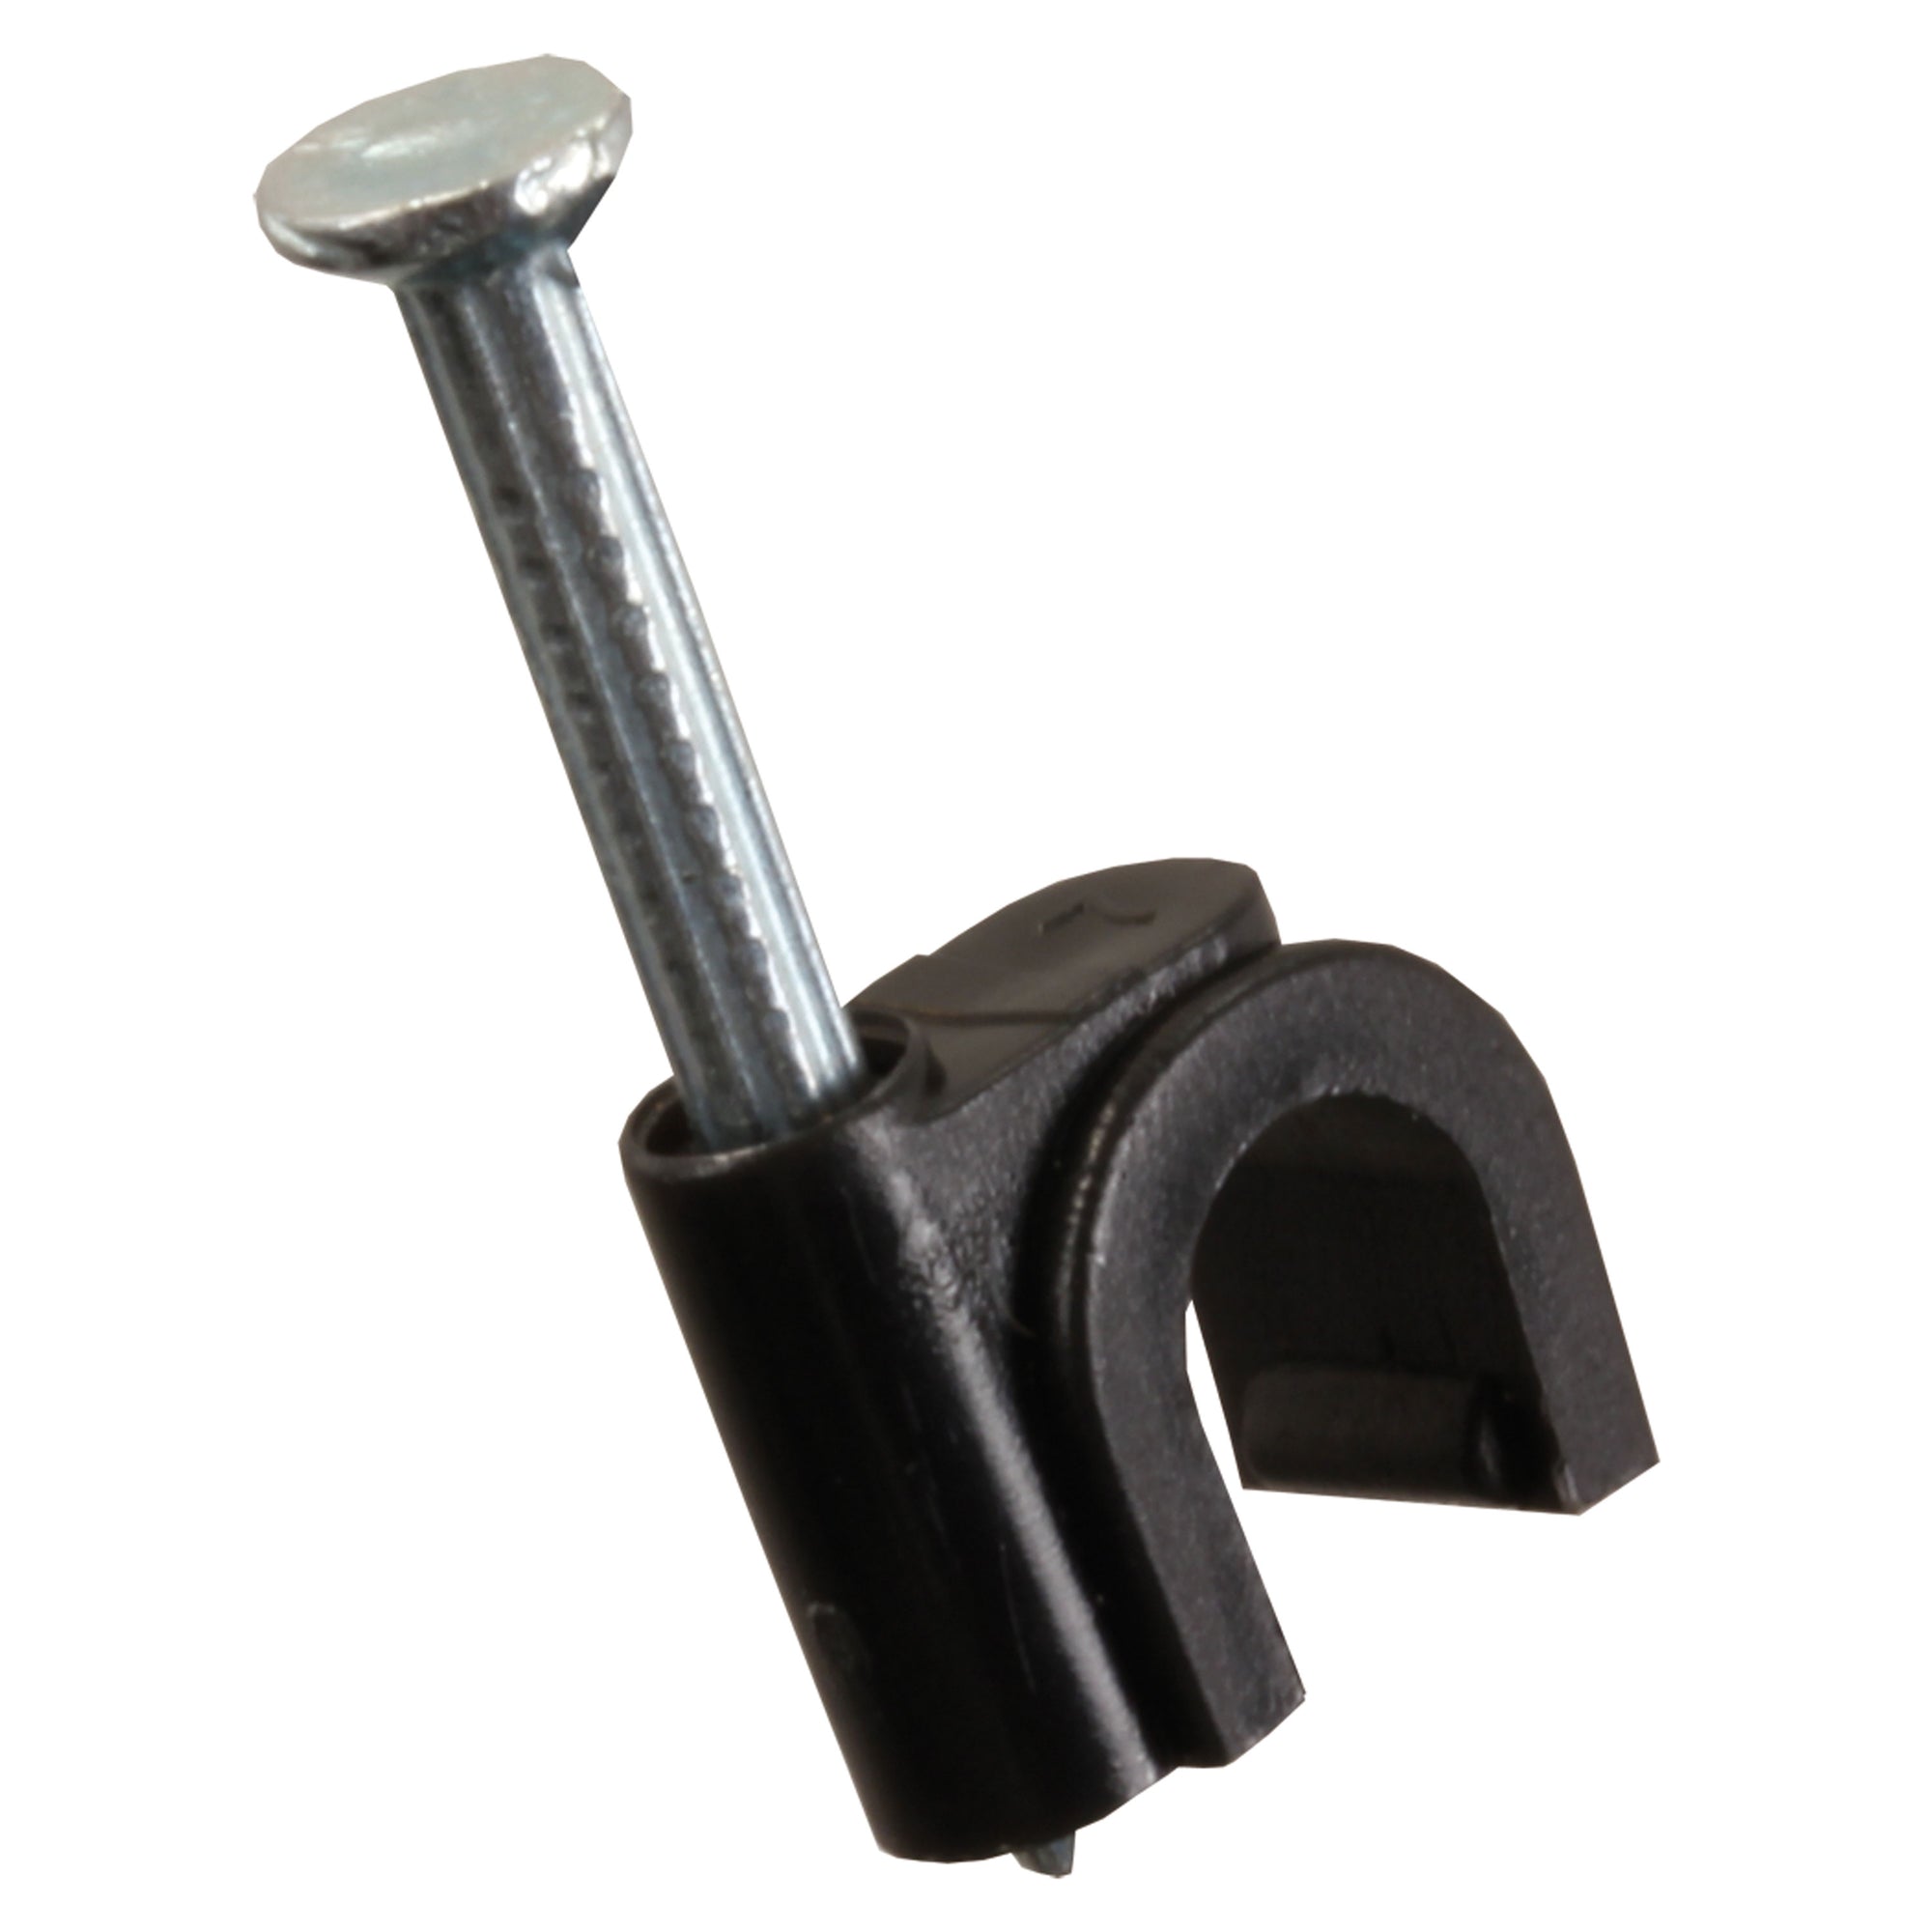 JR Products 47885 RG6 Coax Attaching Clip - Pack of 10